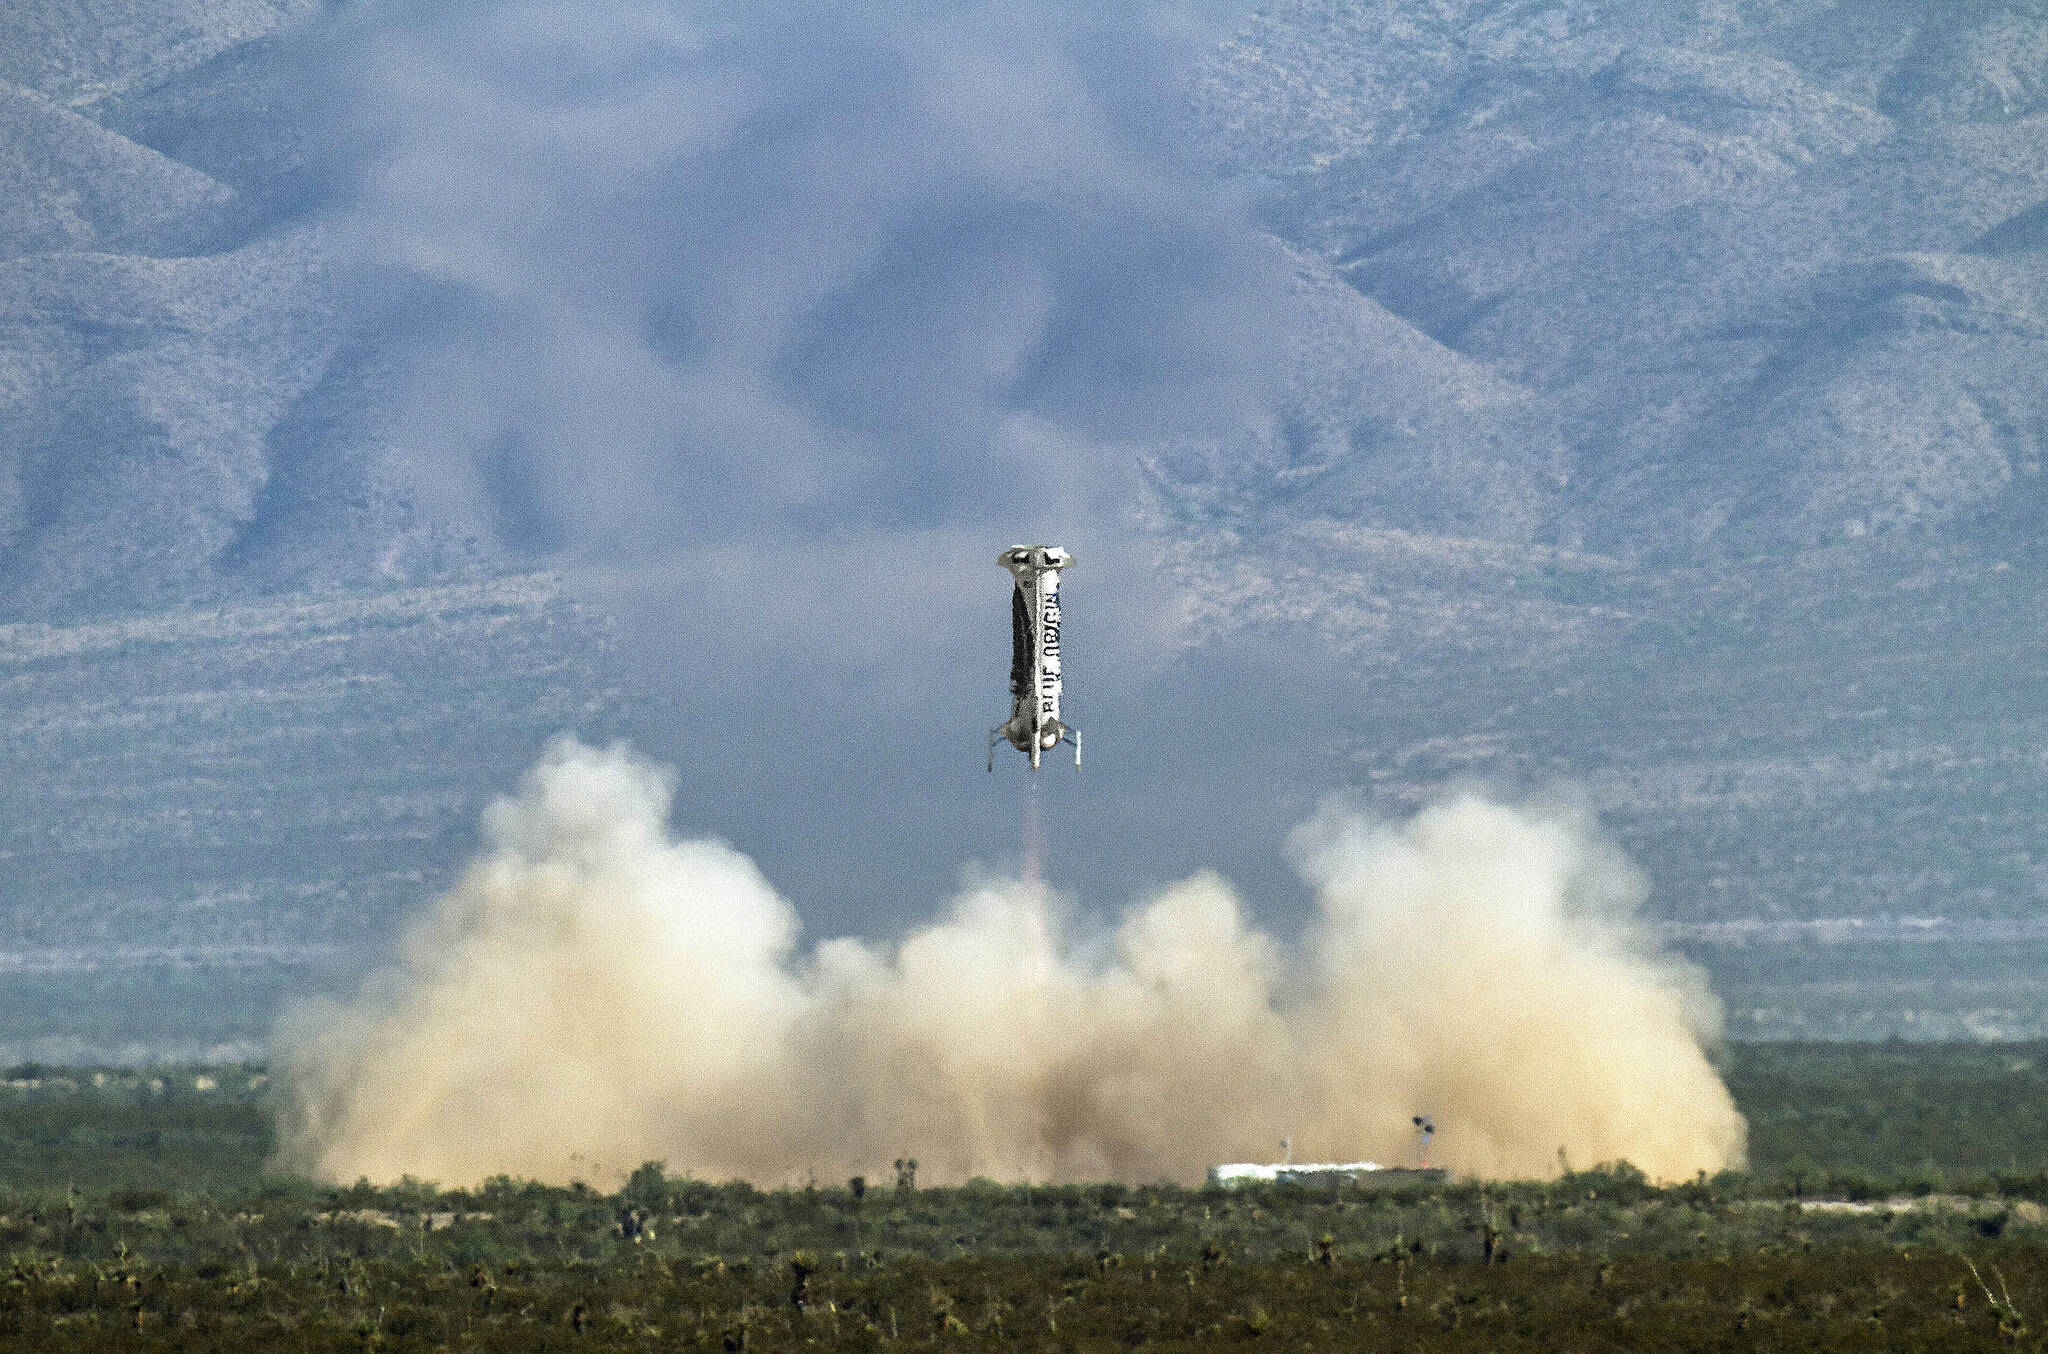 New Shepard booster landing in preparation for last week’s successful launch with Jeff Bezos and others onboard. Photos courtesy of Blue Origin
Jeff Bezos’ space travel company, Blue Origin, announced Monday that William Shatner will blast off from West Texas on Oct. 12. (Photo courtesy of Blue Origin)